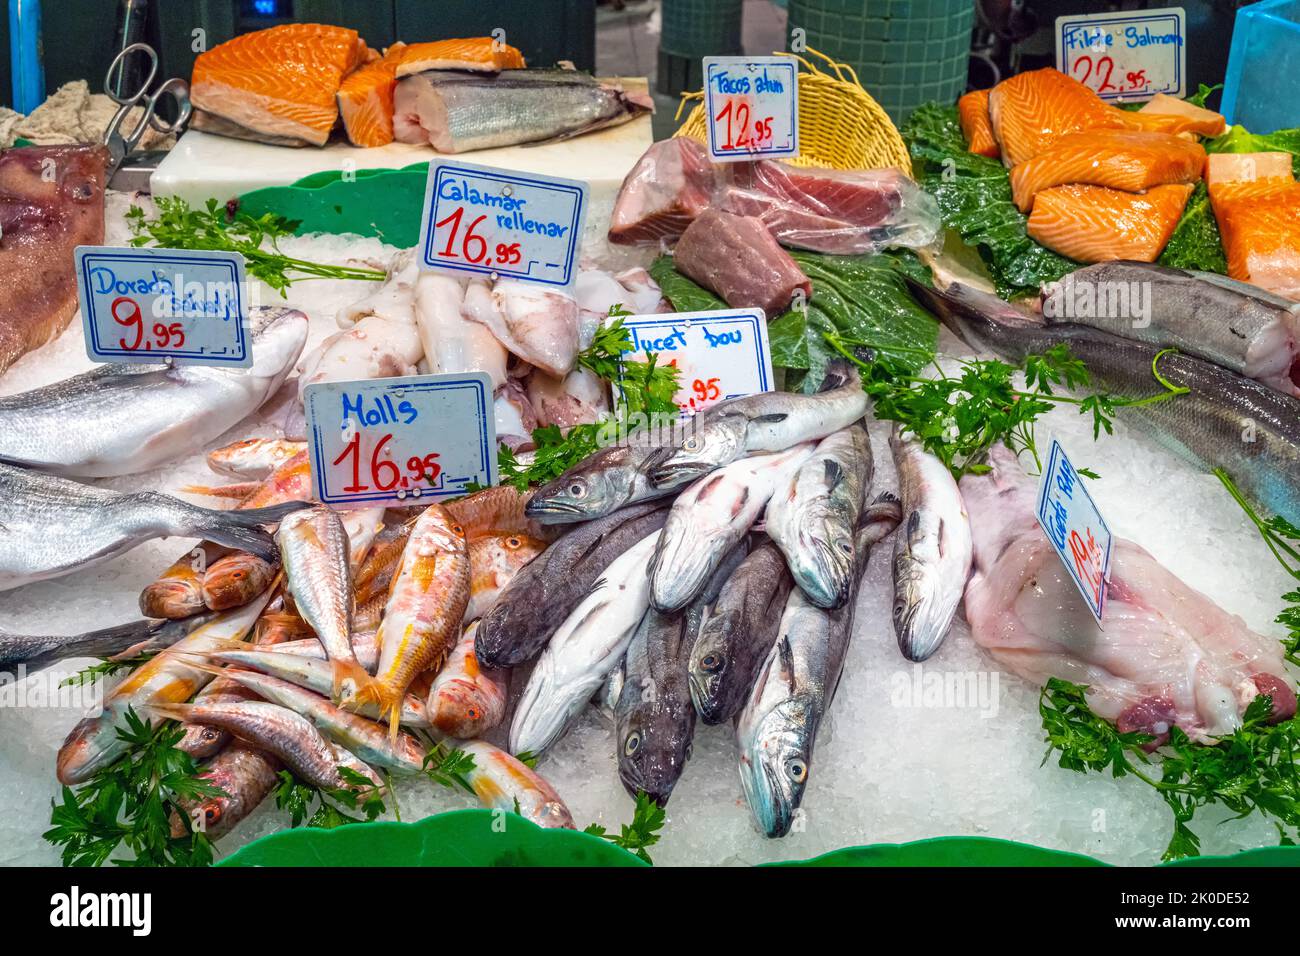 Fresh fish and seafood on ice seen at a market in Barcelona, Spain Stock Photo